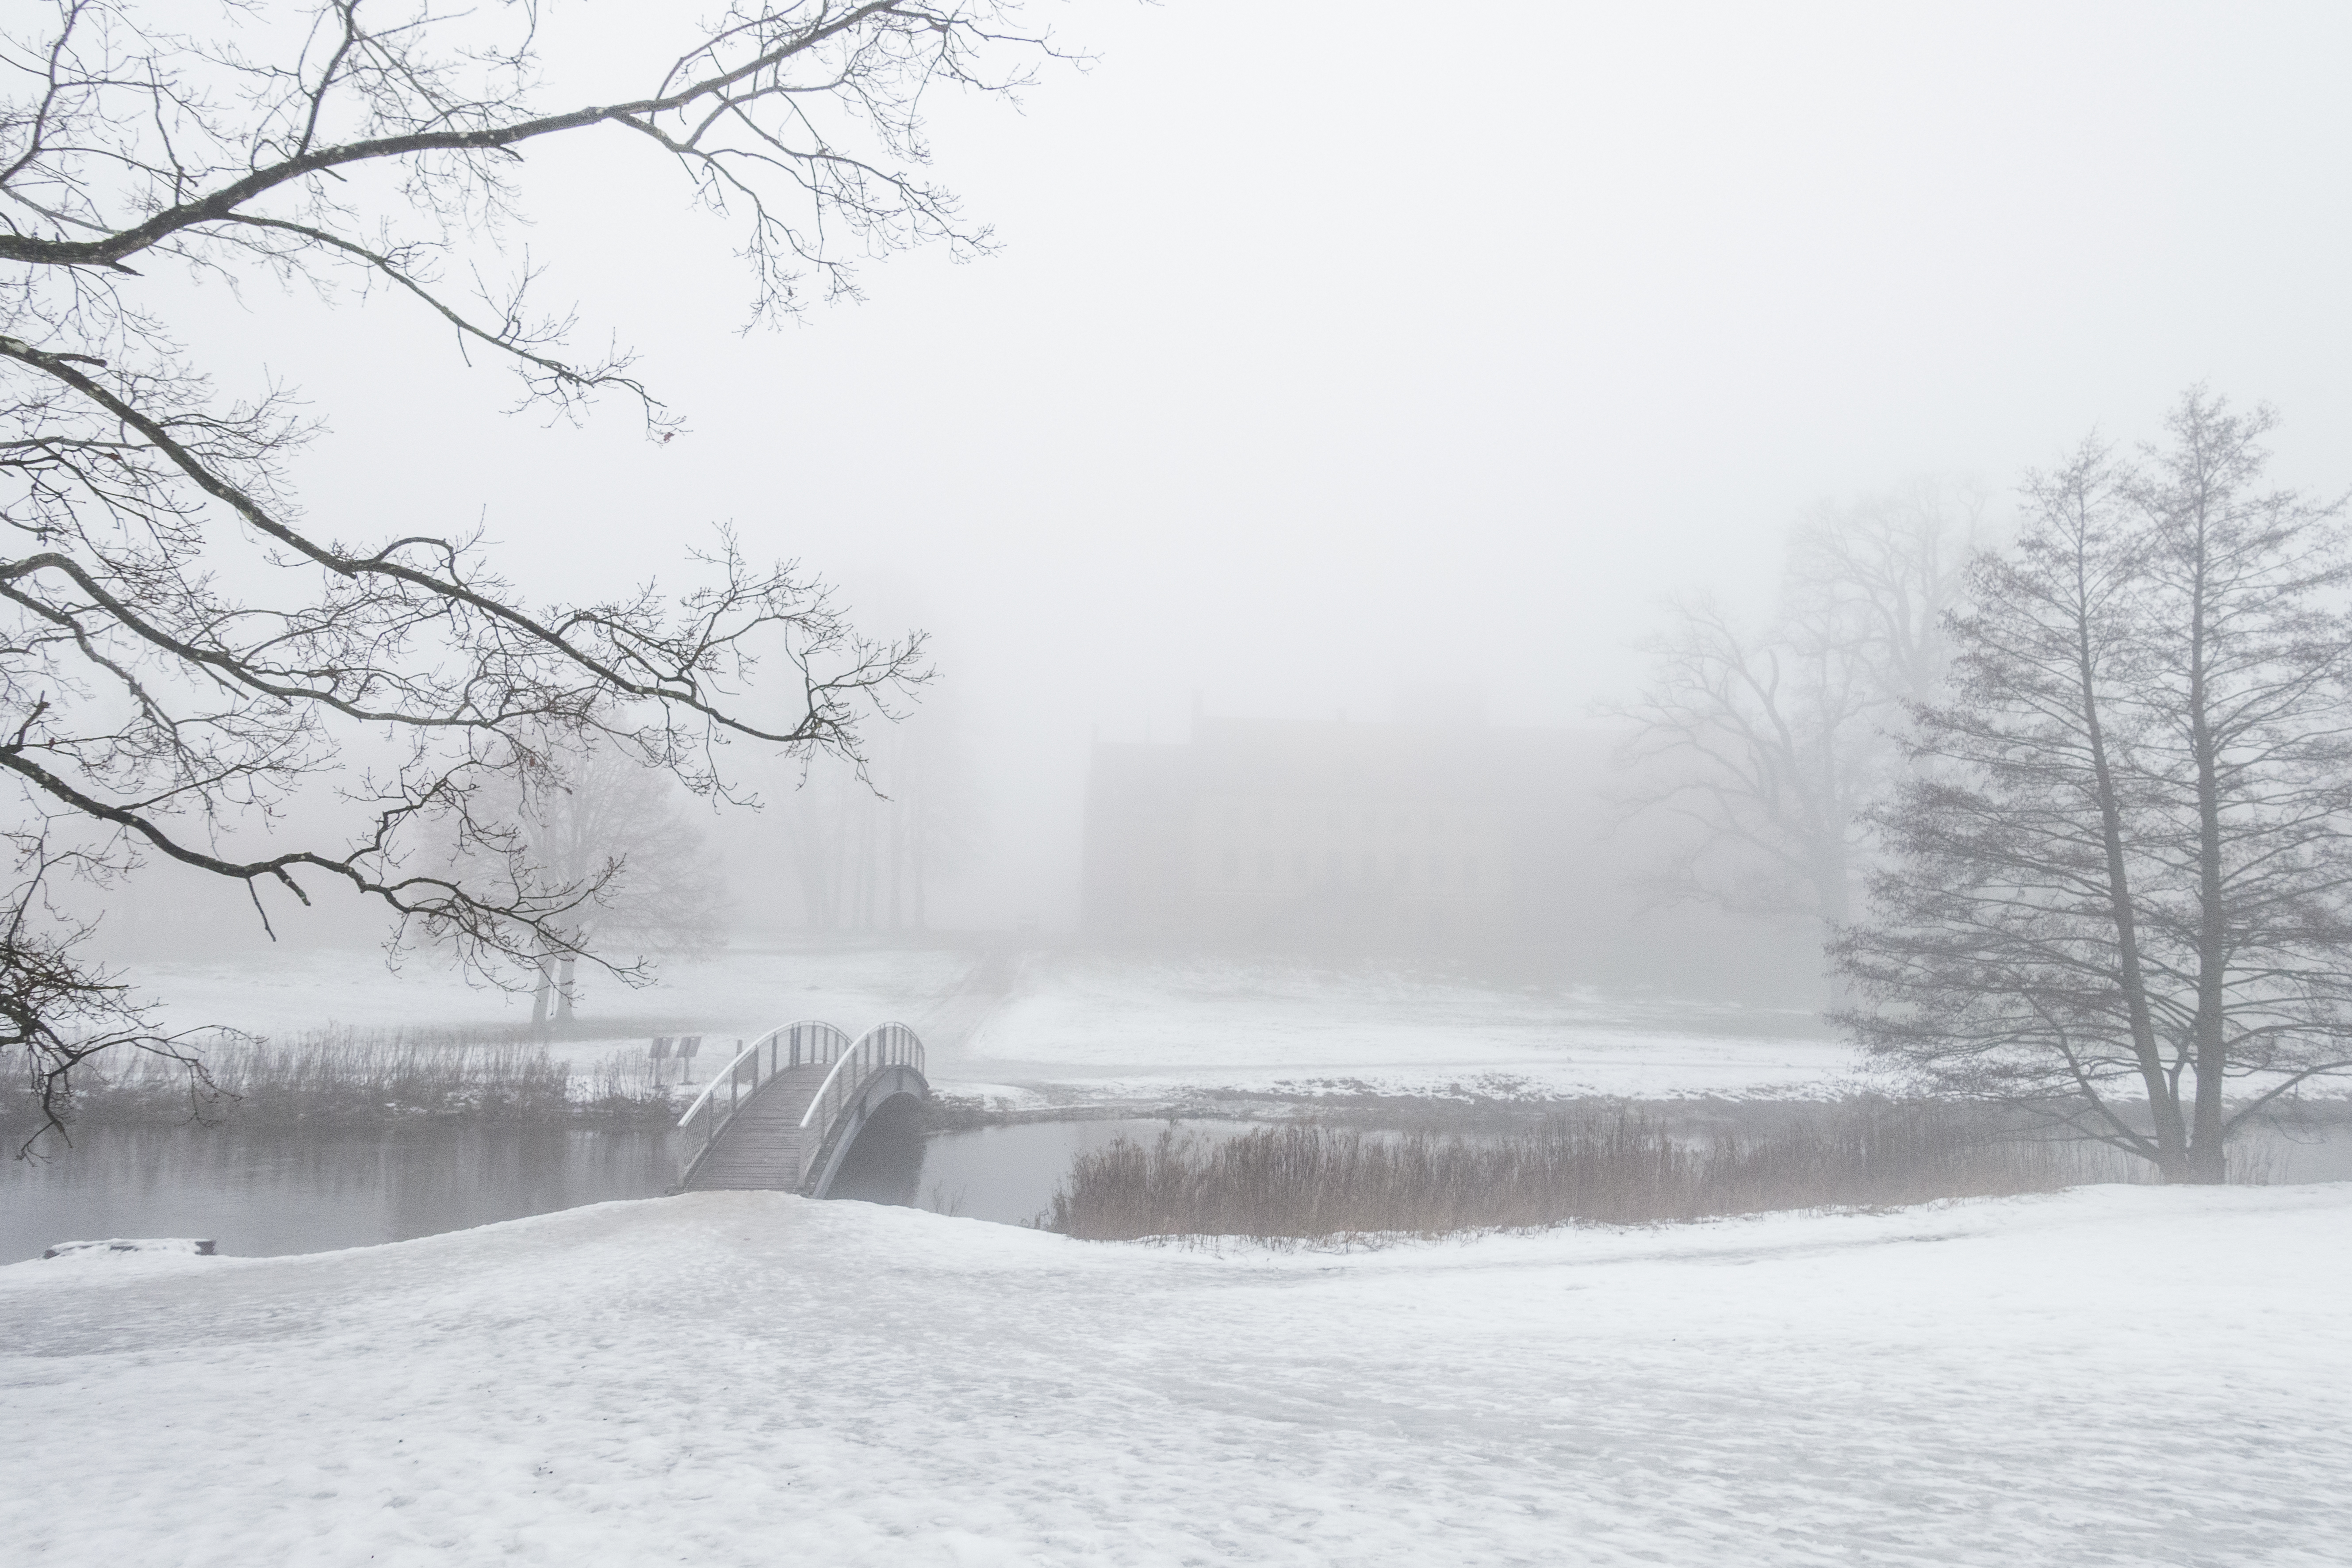 Næstved_city_covered_in_fog_HelenaLundquist_19